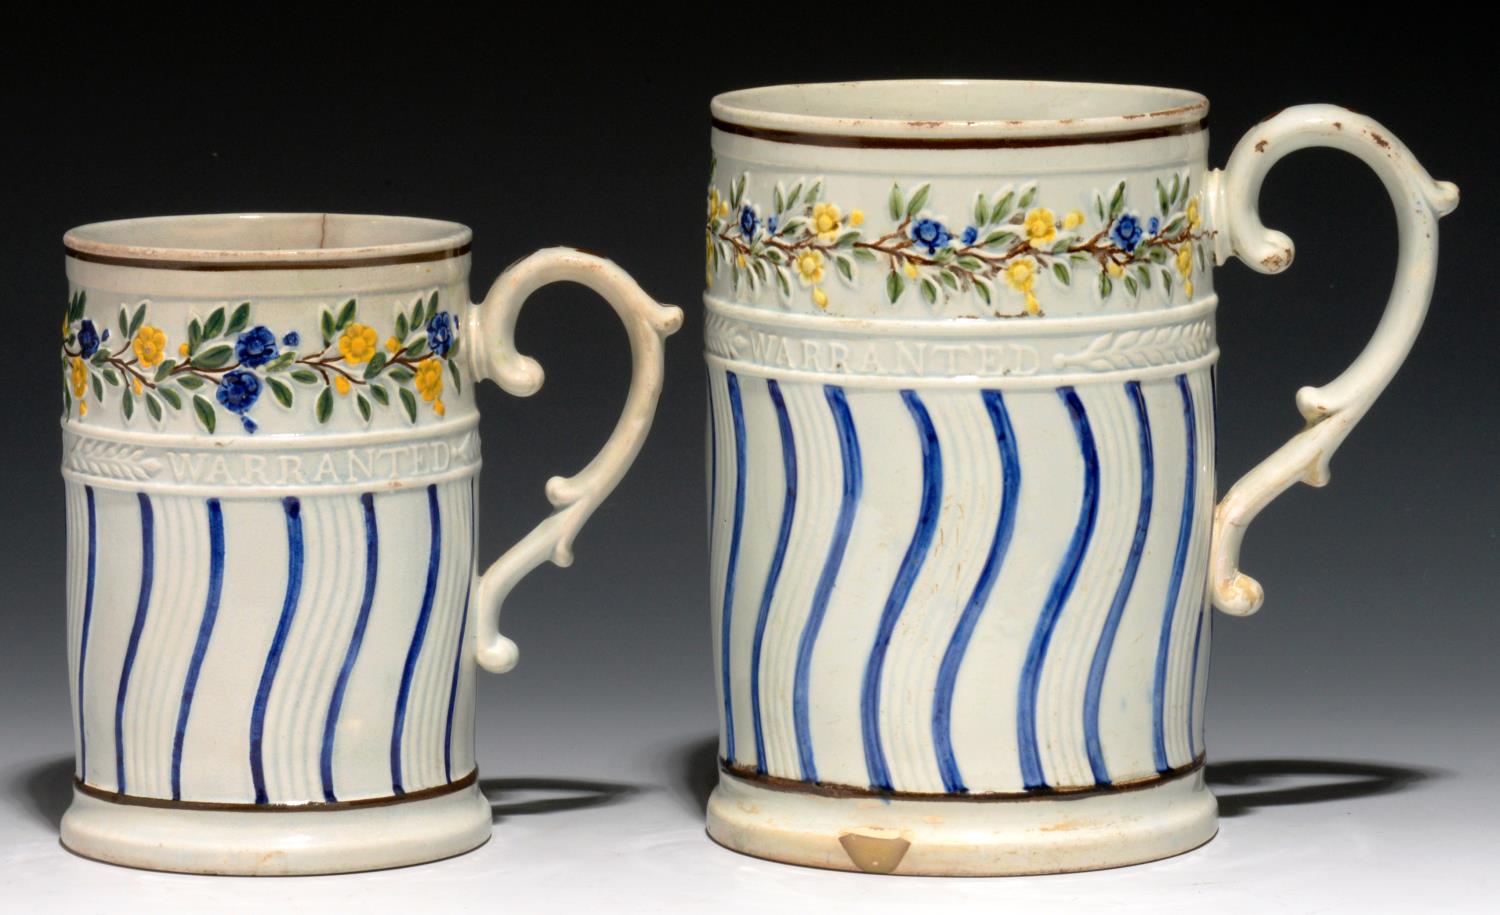 TWO GRADUATED CYLINDRICAL PRATT WARE WINCHESTER MEASURES, C1830 moulded with trailing flowers in a